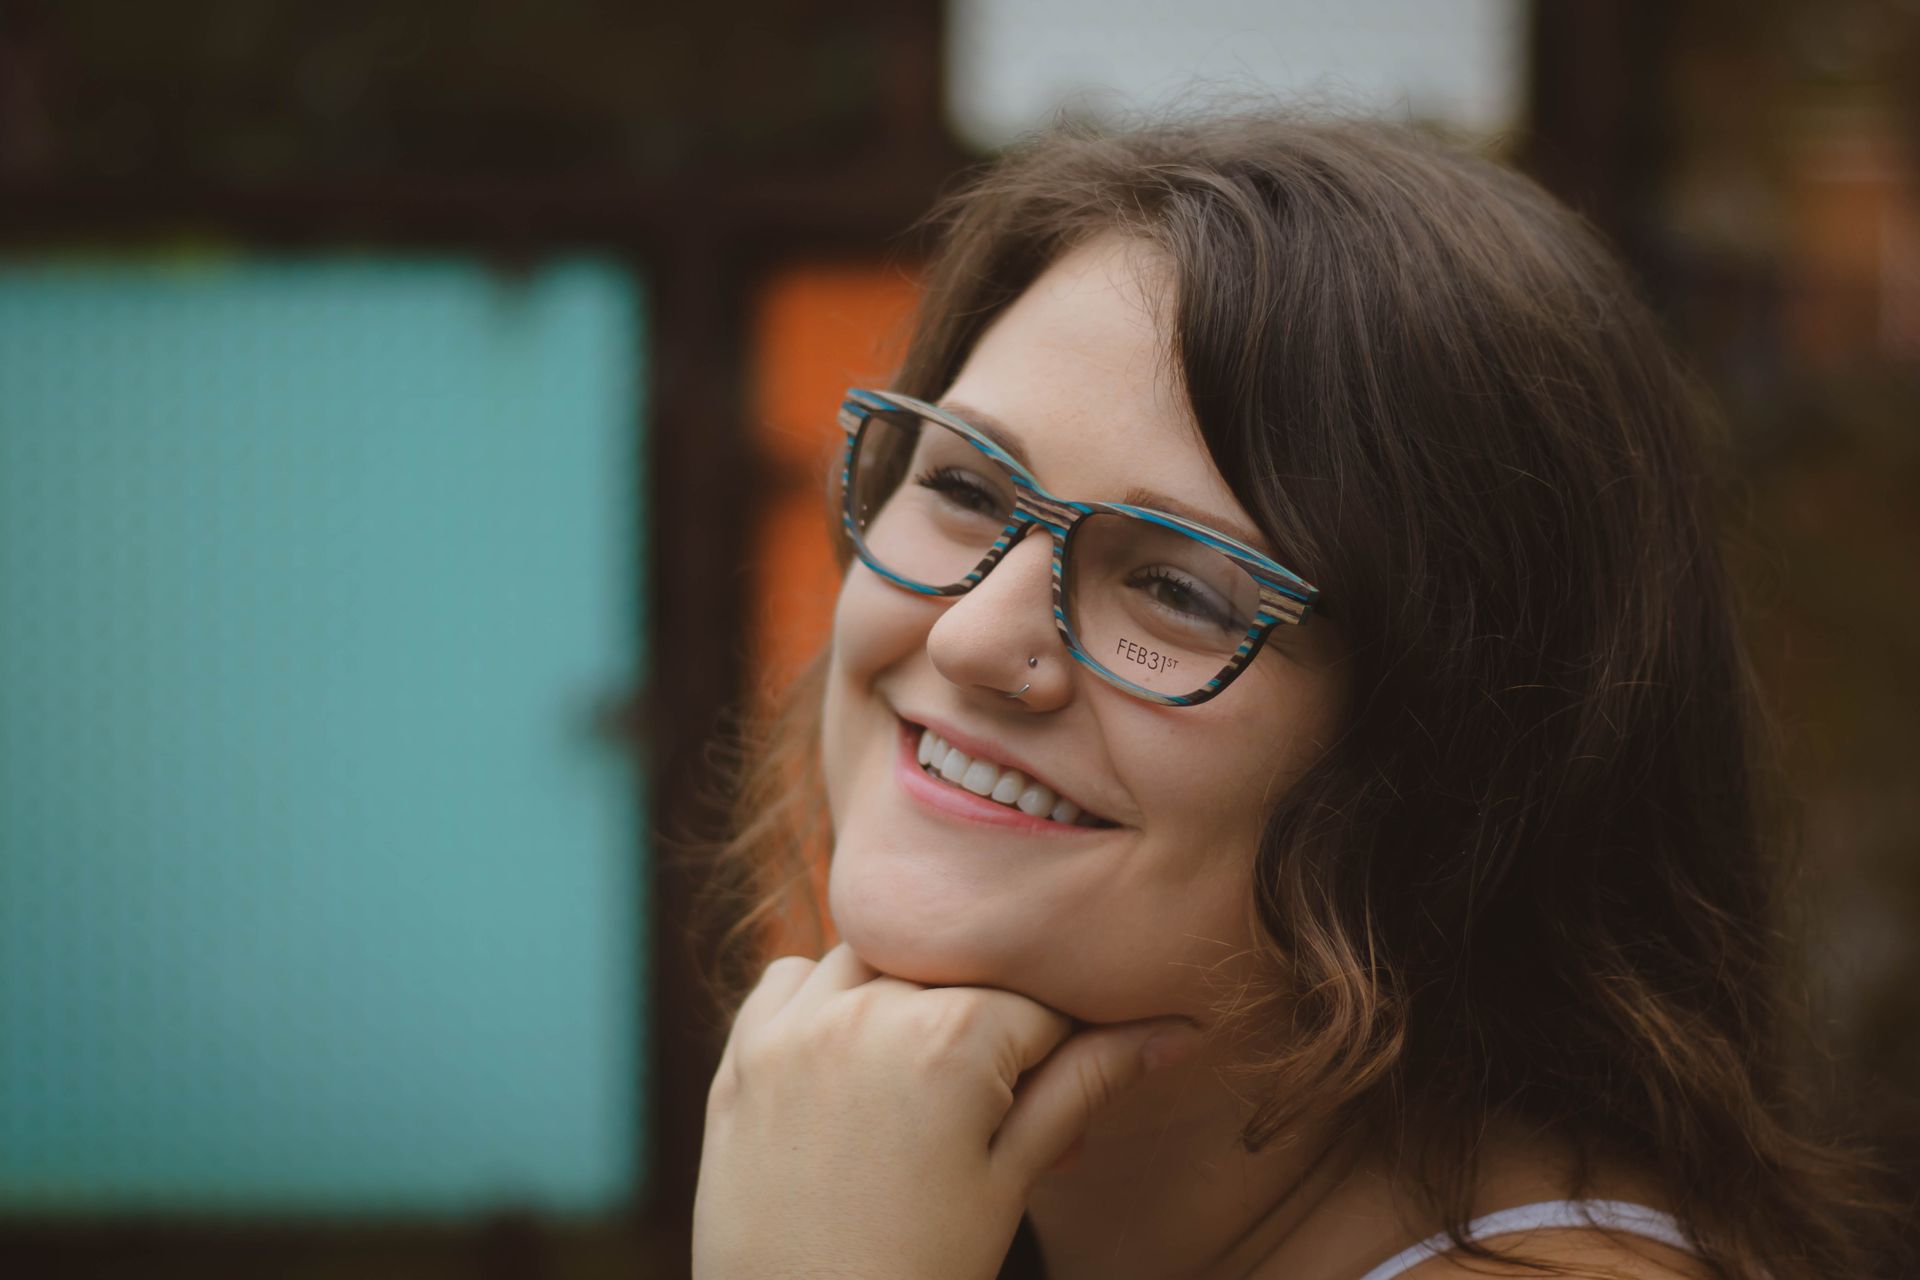 woman smiling and wearing glasses